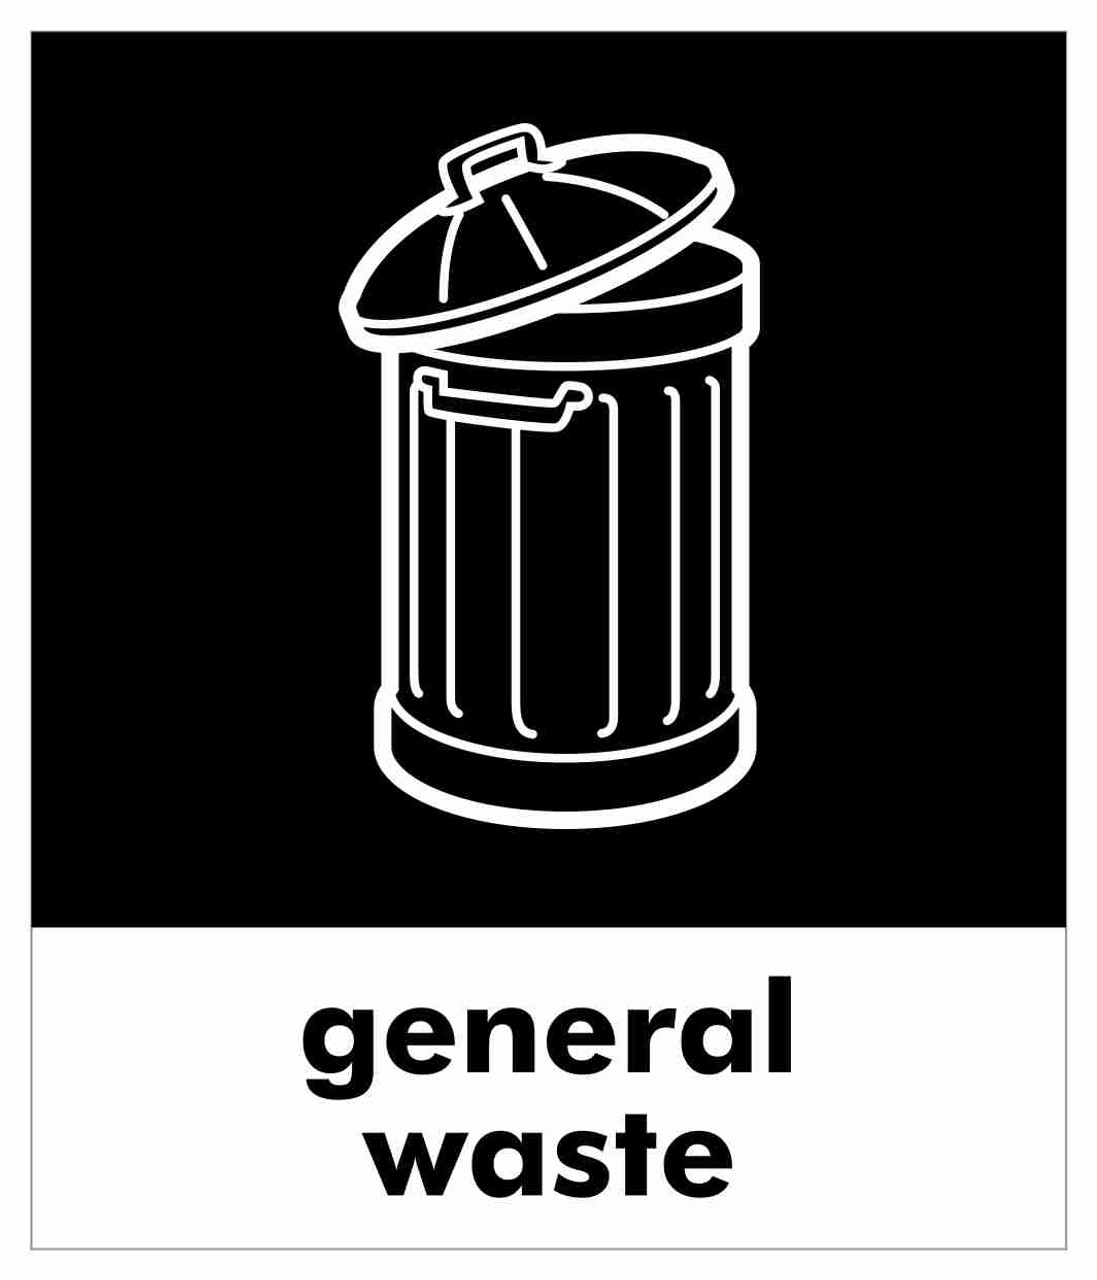 PC85GW - A small square sticker with the white outline of a dustbin on black background, featuring general waste text